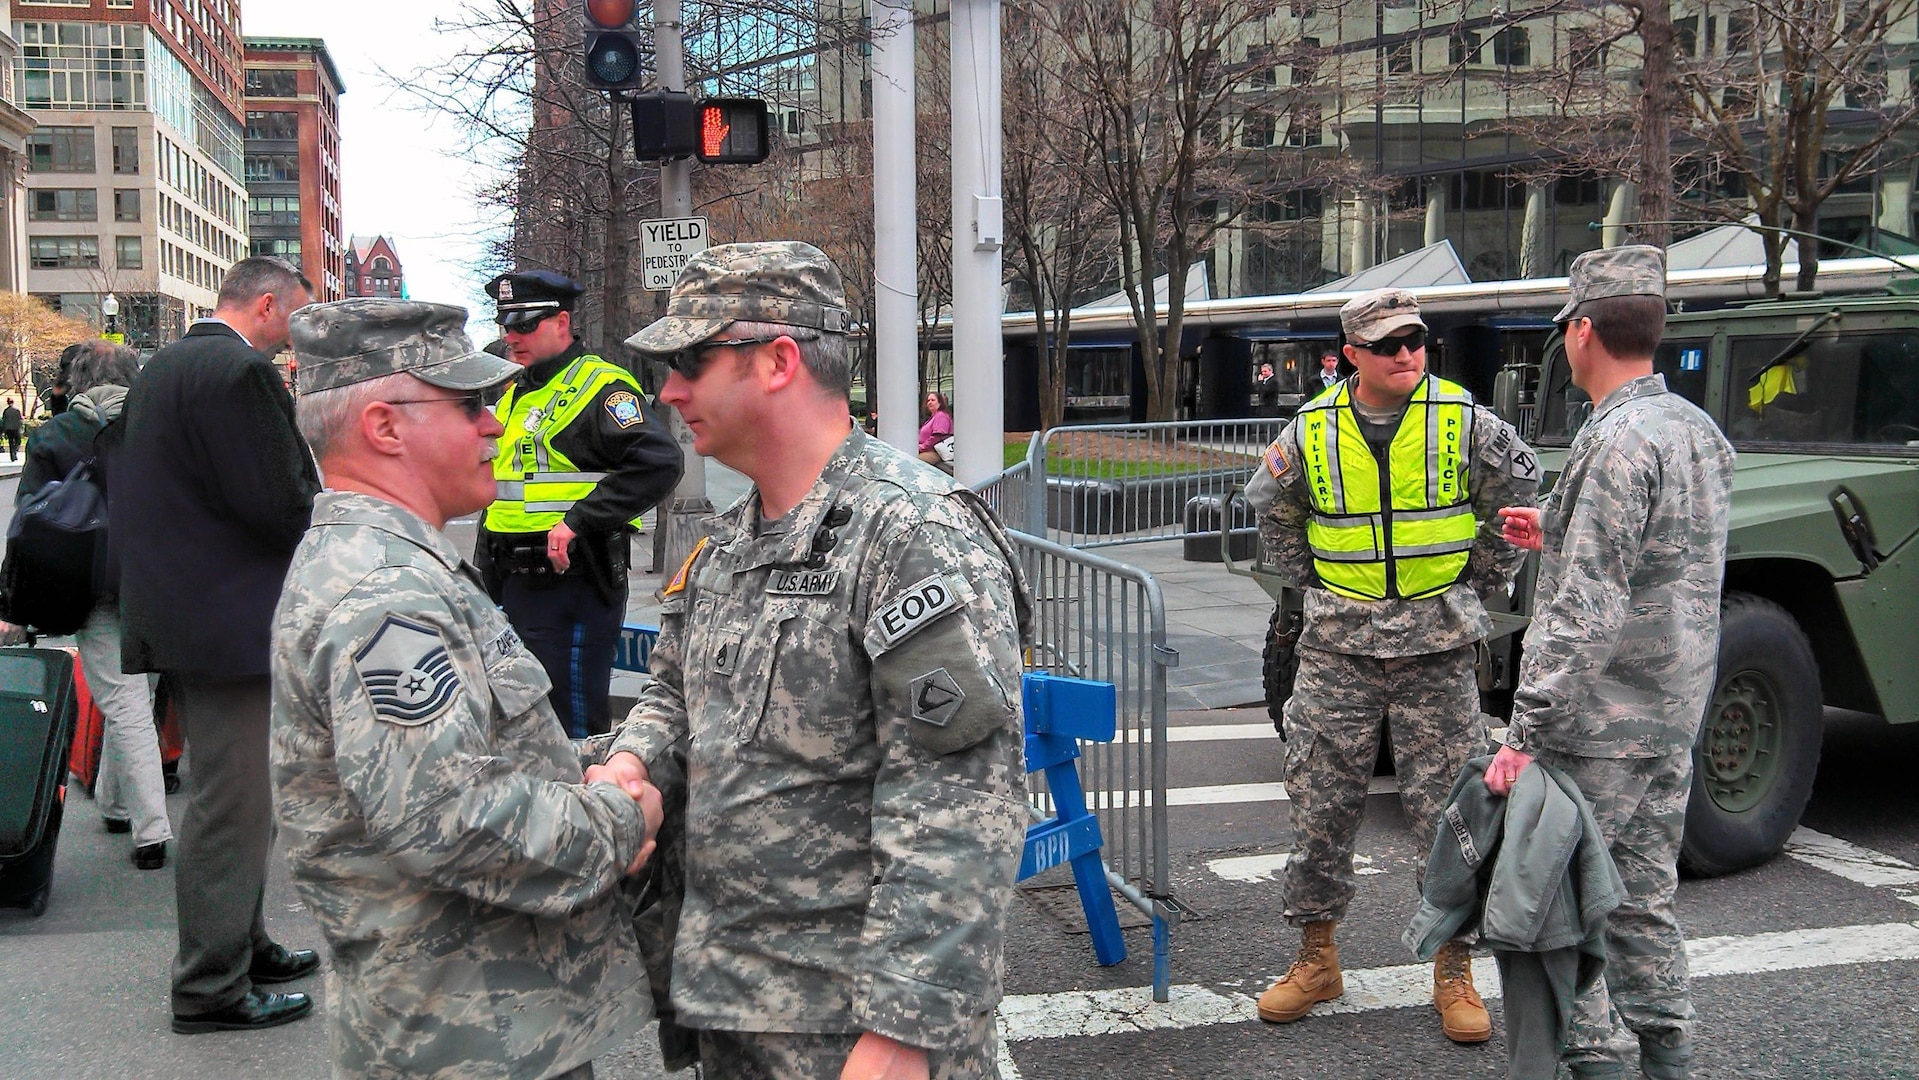 Chaplains and chaplain’s assistants with the Massachusetts National Guard talk with Soldiers from the Massachusetts Army National Guard in the wake of the explosions at the finish line of the Boston Marathon. Chaplains with the Massachusetts Guard provided spiritual support to those who have responded to the events in Boston.